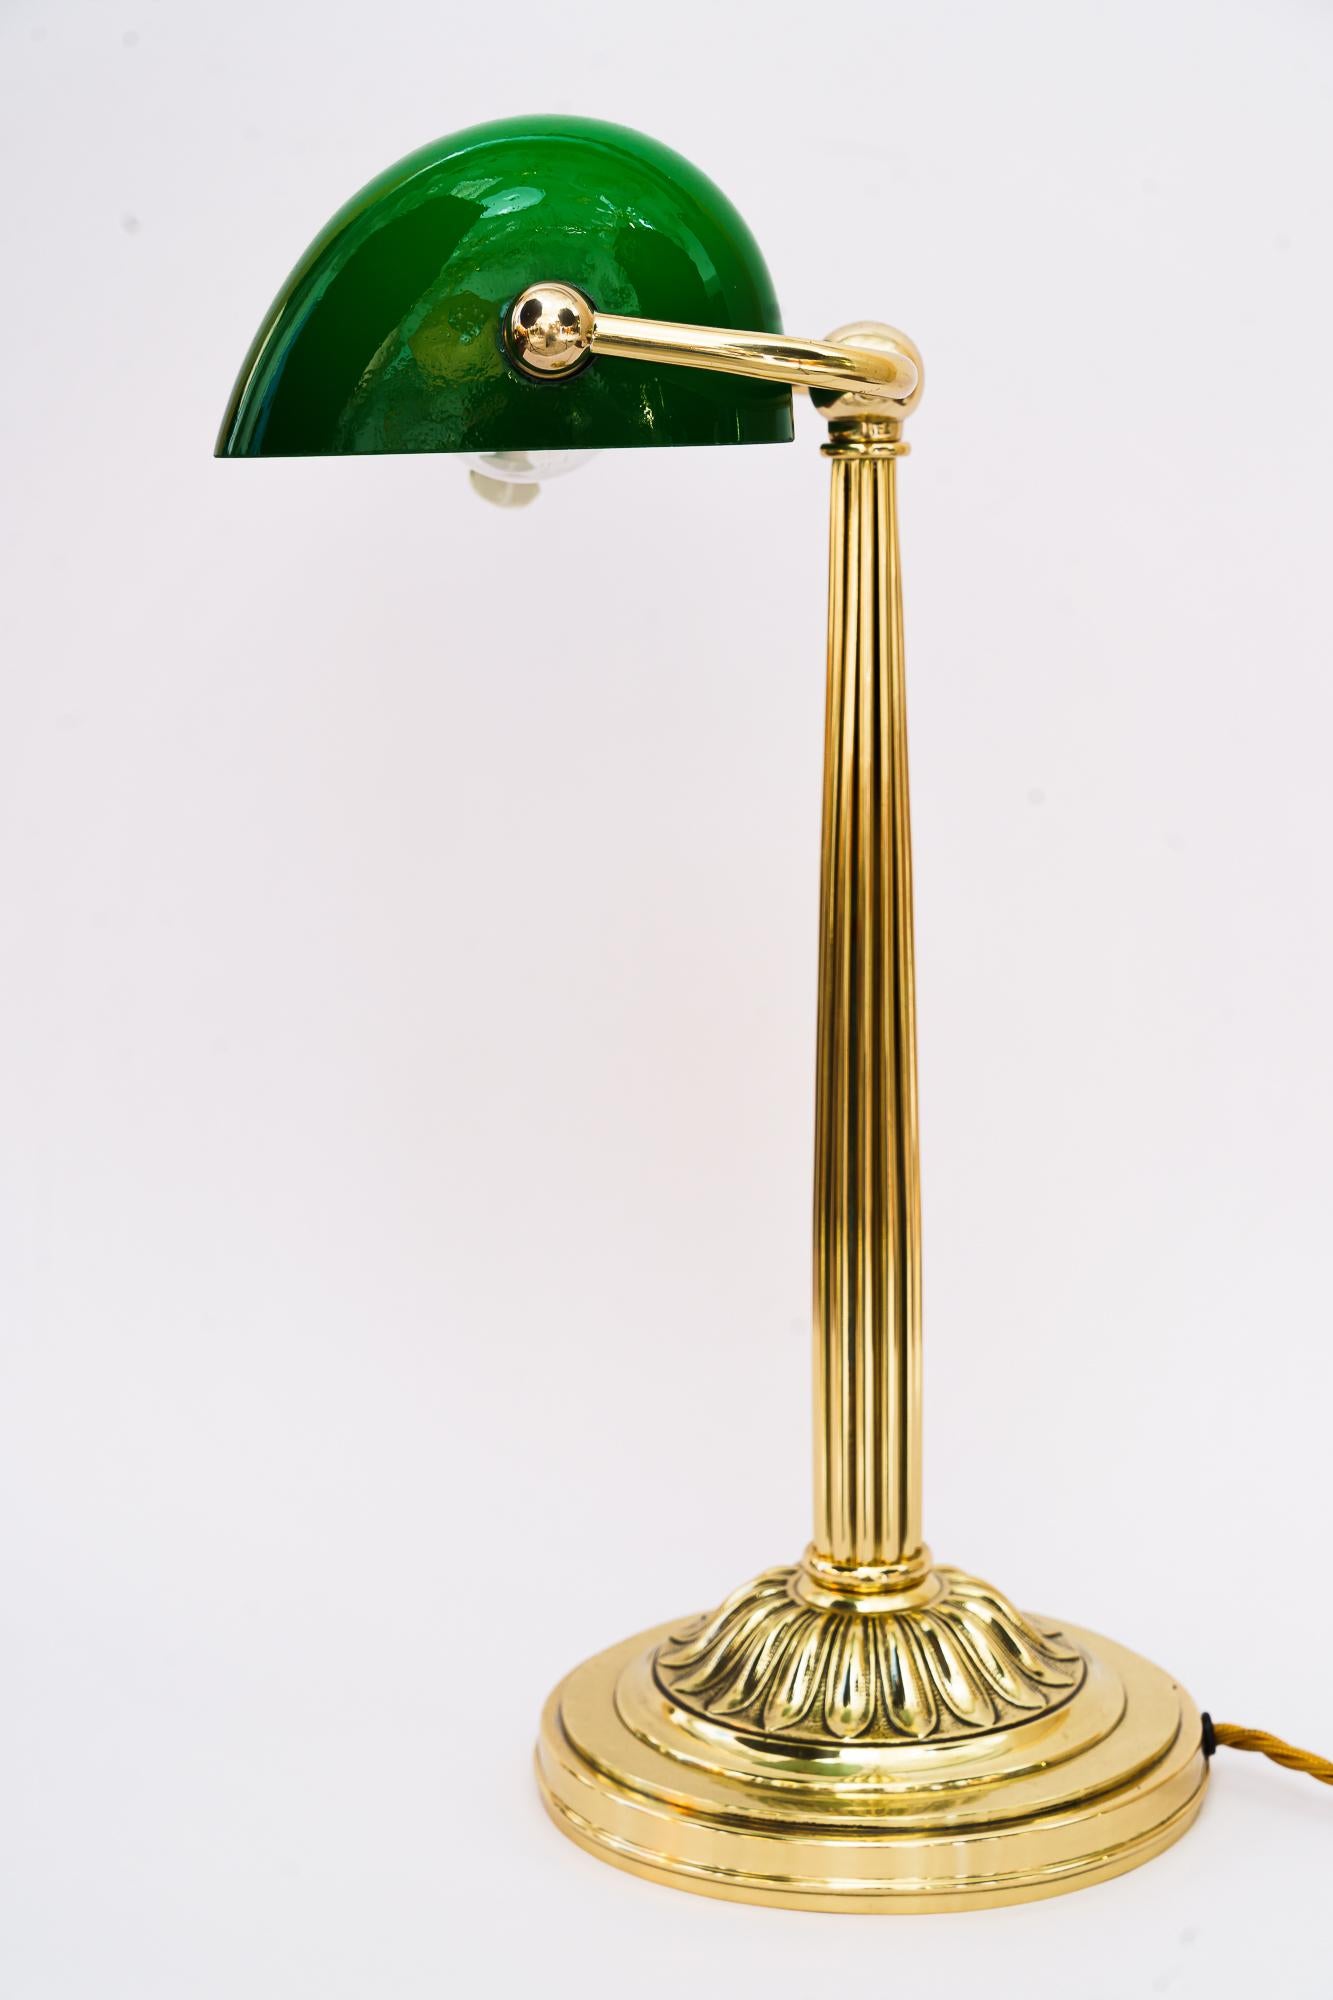 Art Deco banker table lamp with green glass shade vienna around 1920s
Brass polished and stove enameled
Original glass shade.